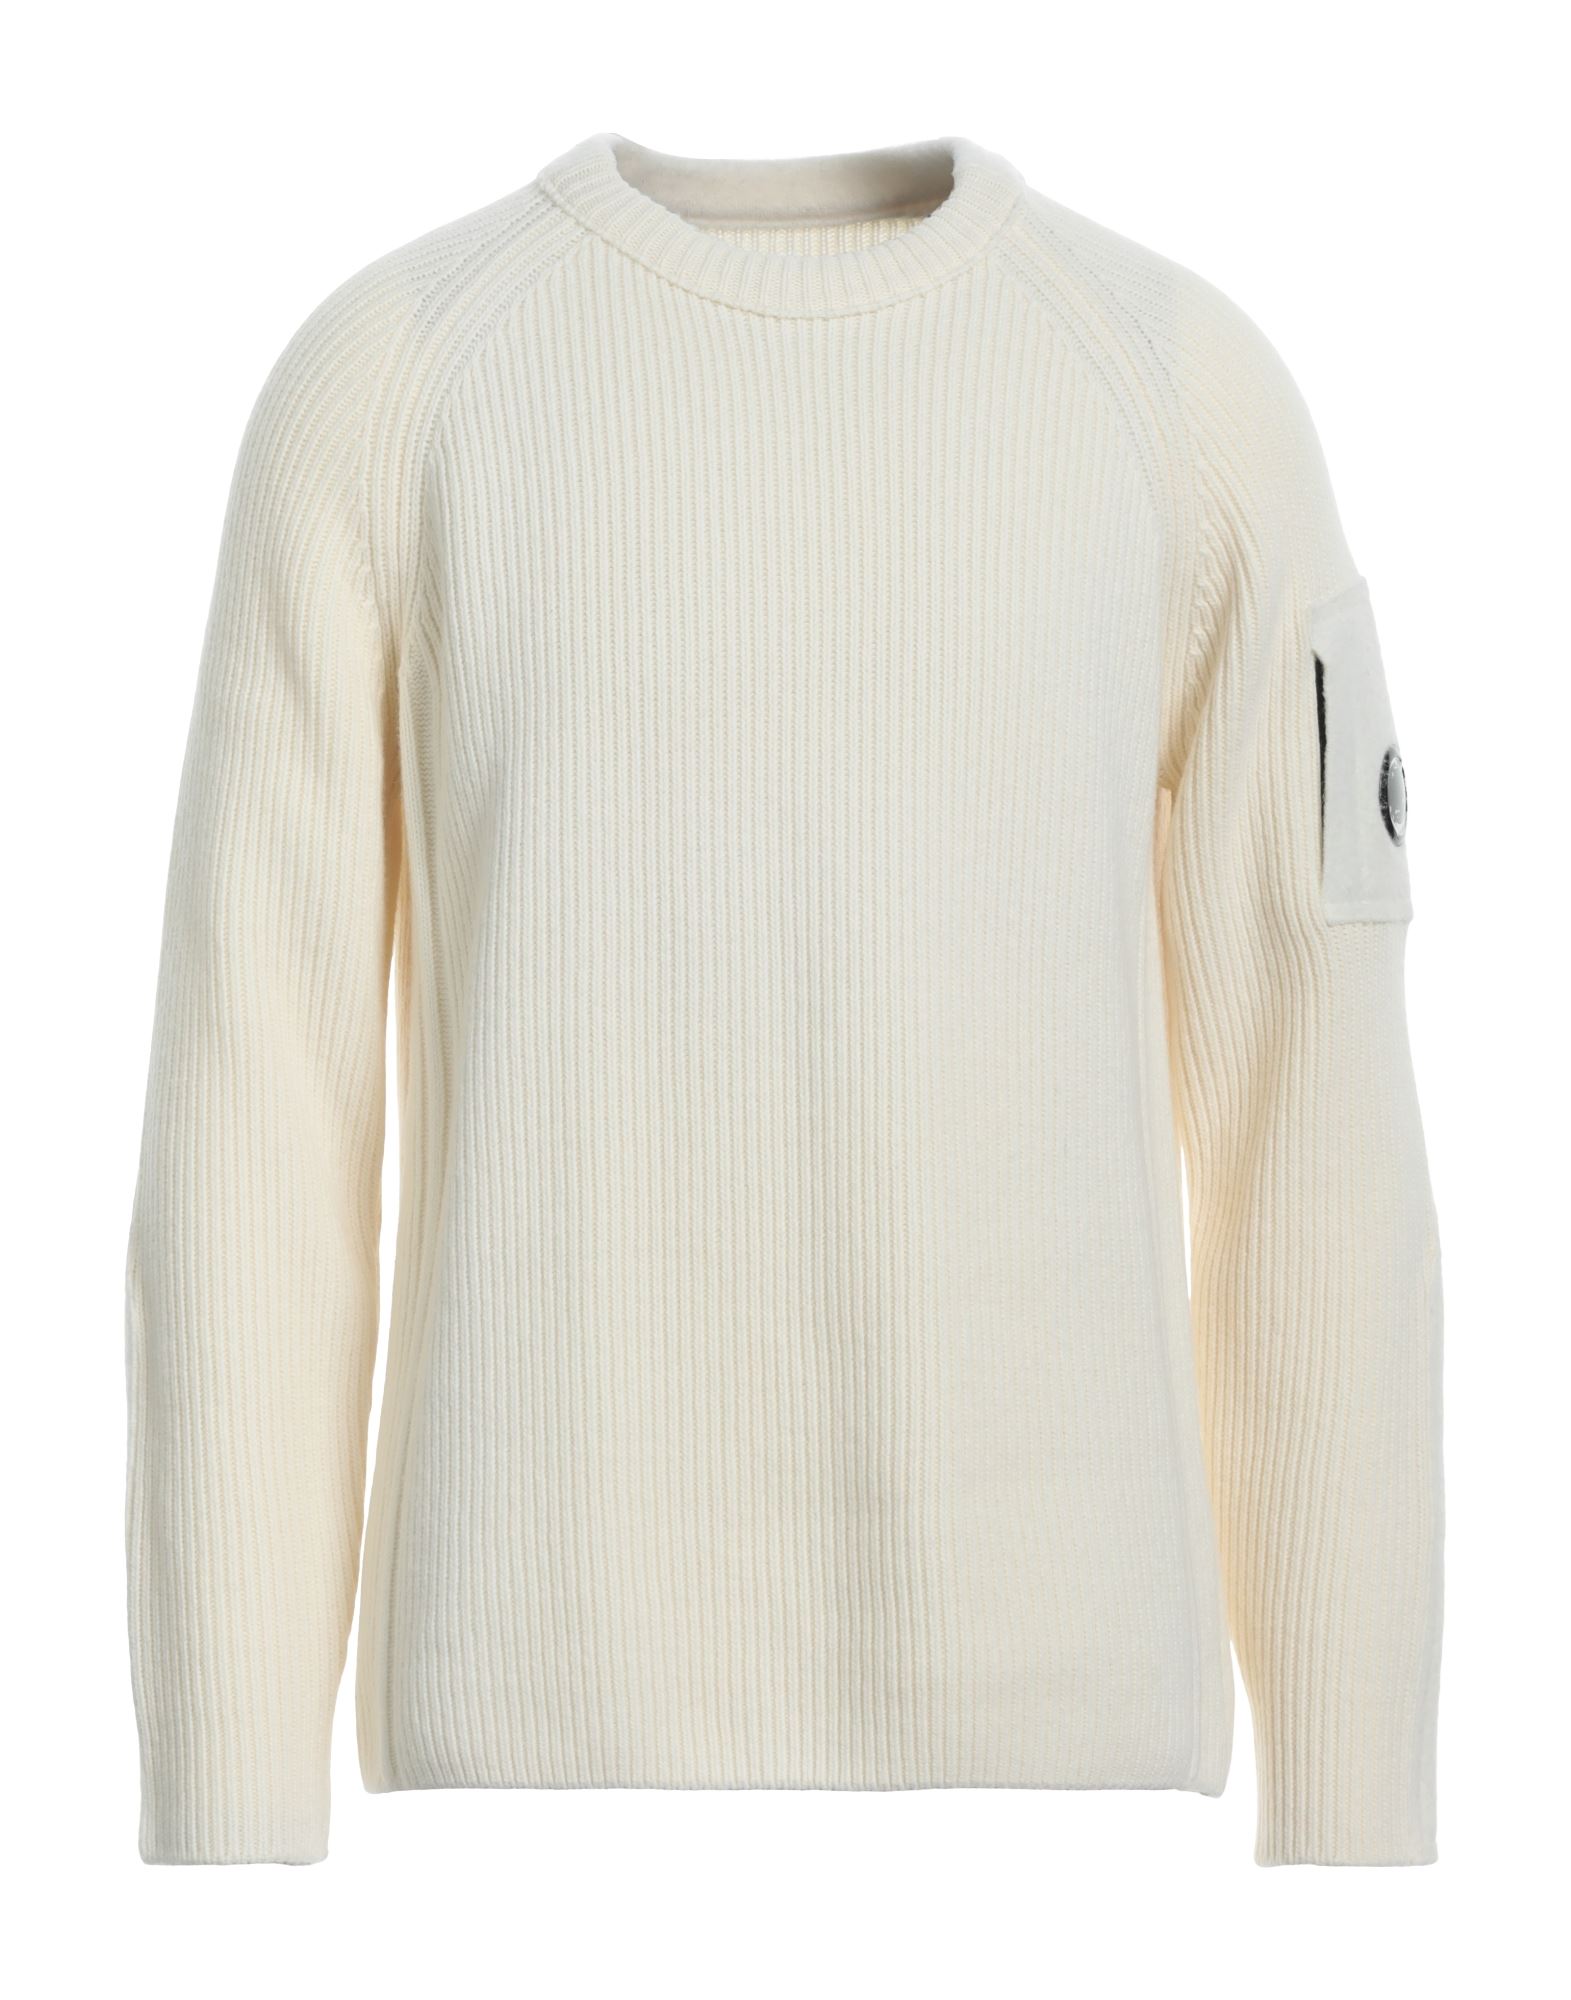 C.p. Company Sweaters In Ivory